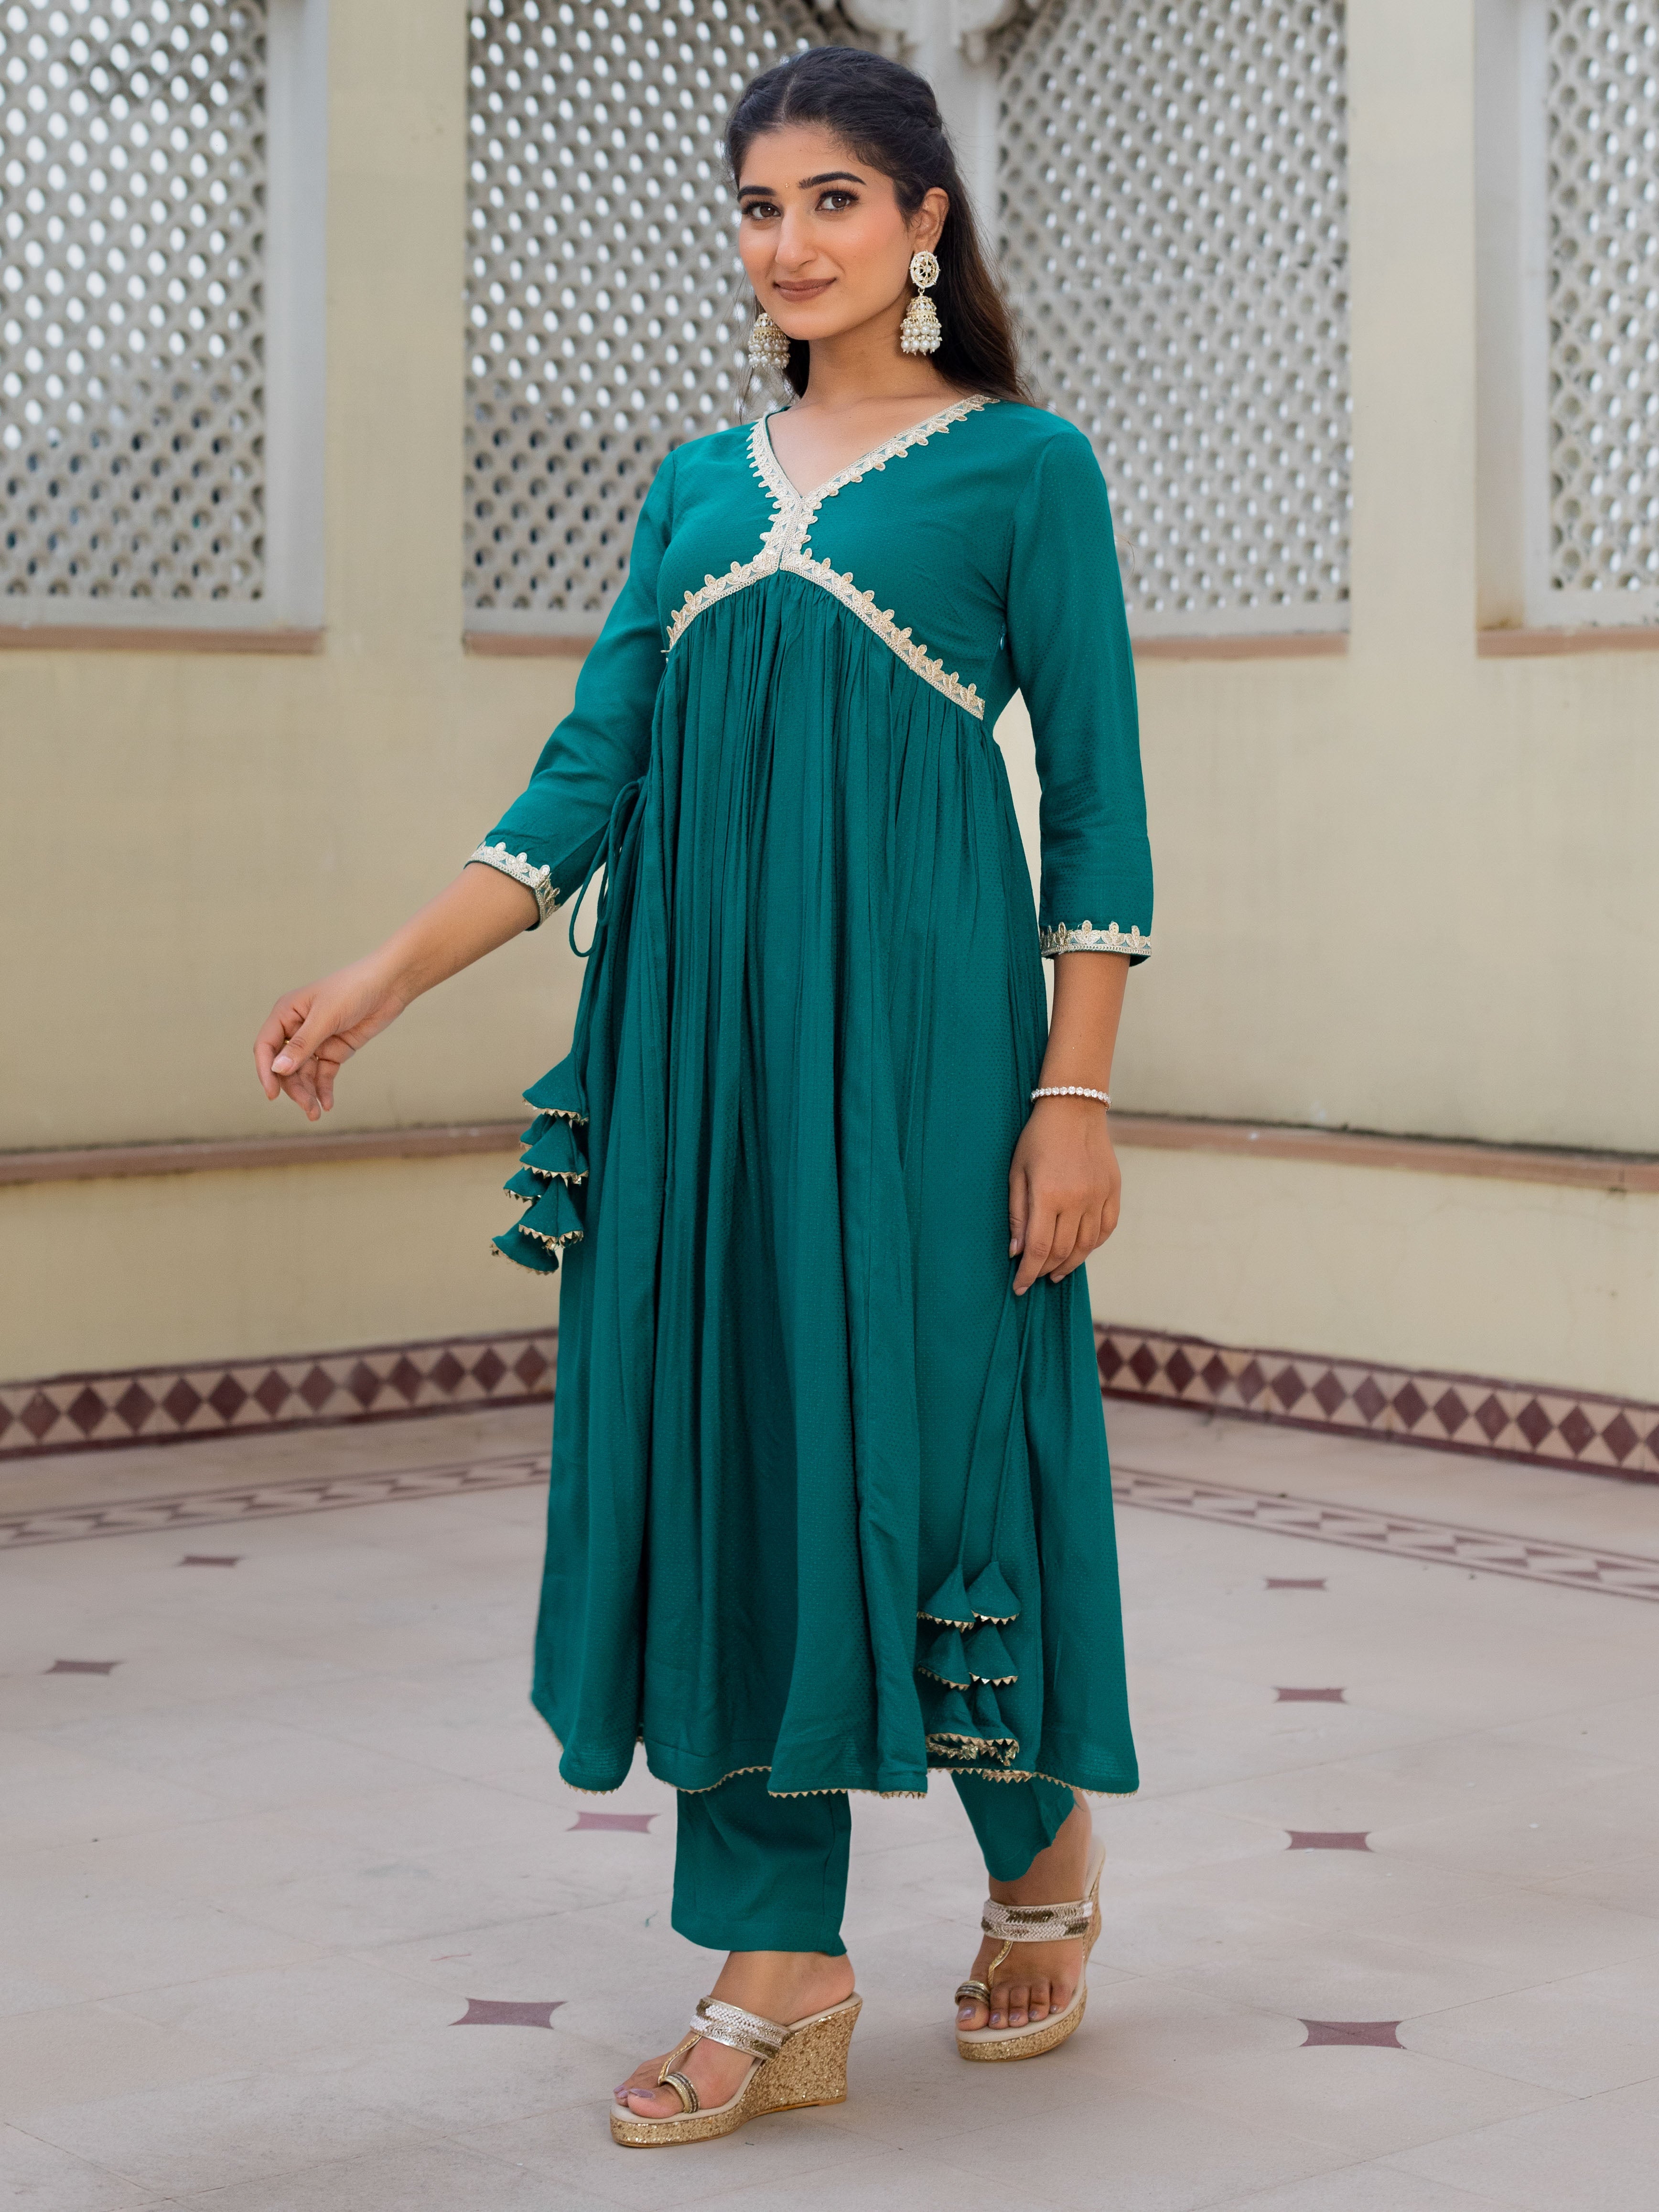 look-effortlessly-stylish-with-this-beautiful-v-neck-green-a-line-kurta-with-pant-featuring-intricate-lace-detailing-and-side-tassels-this-kurta-is-sure-to-make-a-statement-and-is-perfect-for-a-variety-of-occasions